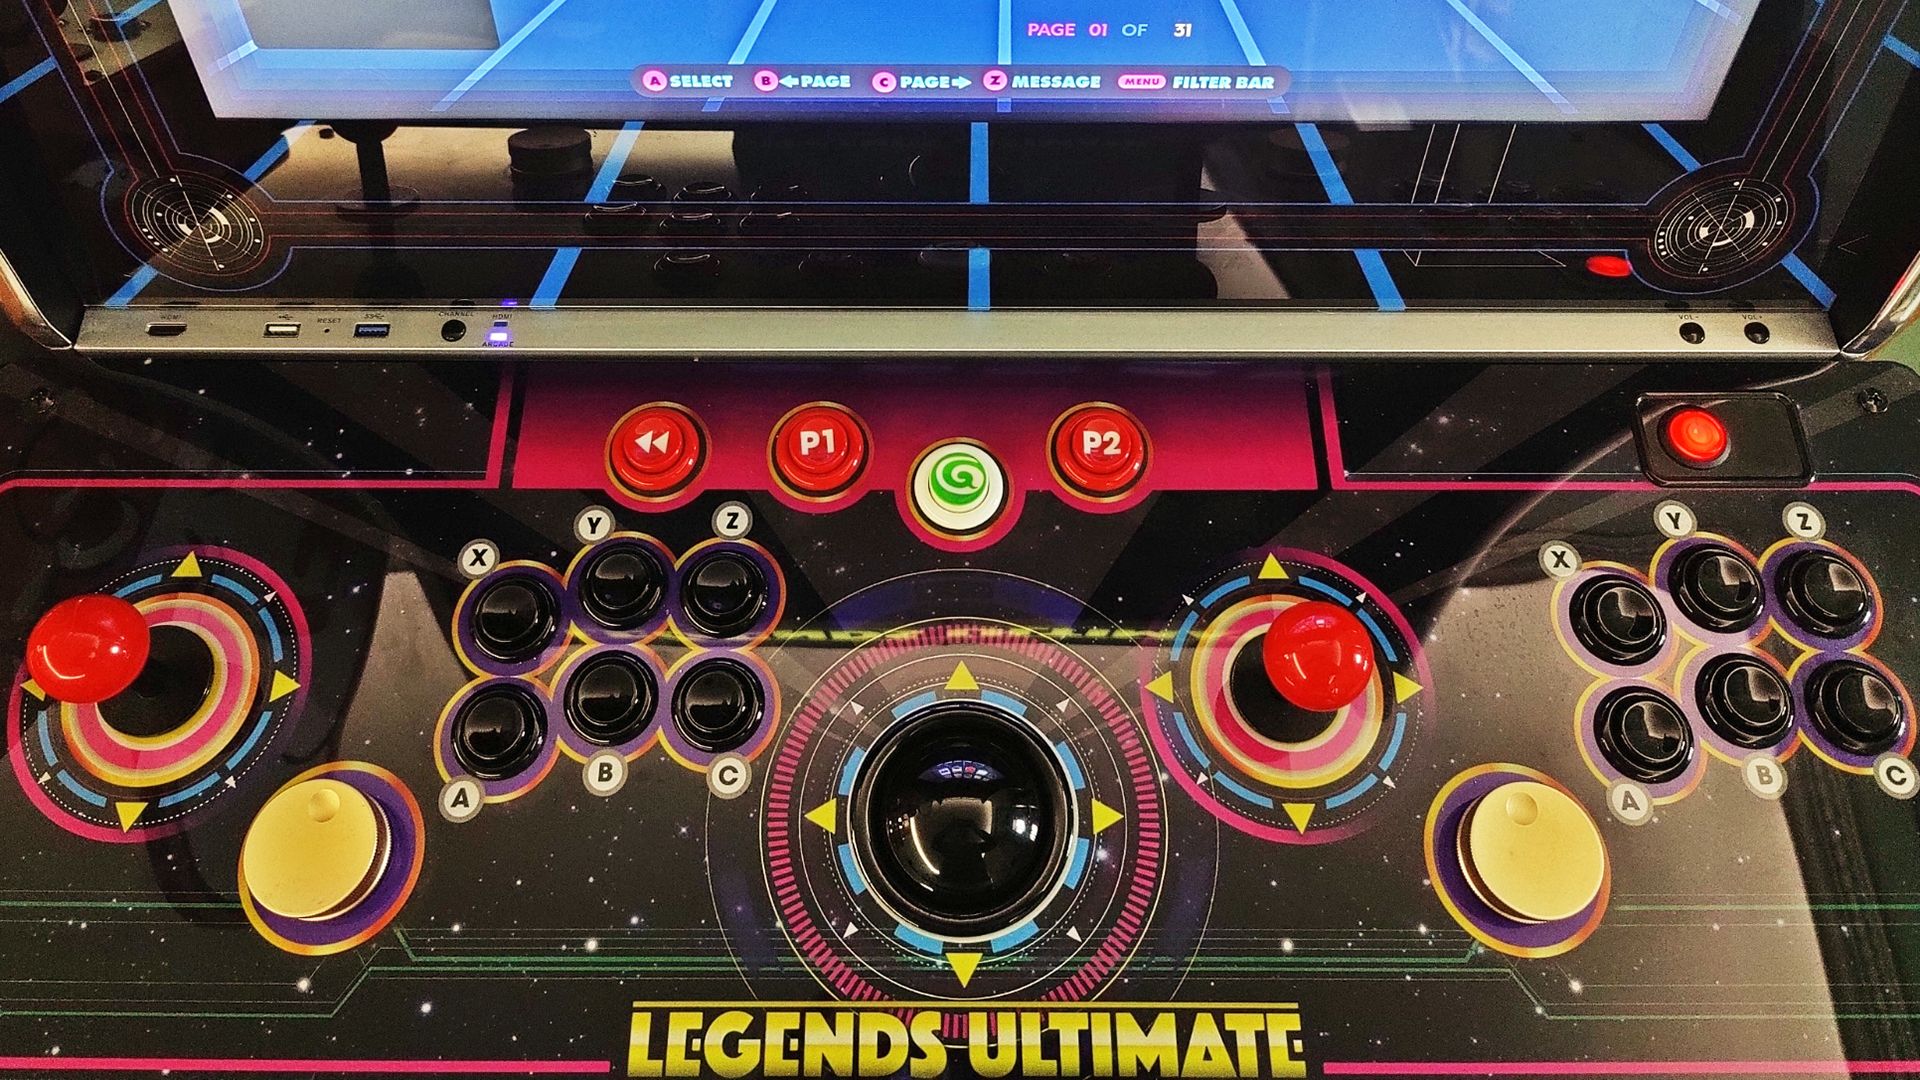 A top down view of the Legends Ultimate control deck, with two joysticks, 12 buttons, two spinners, and a trackball.